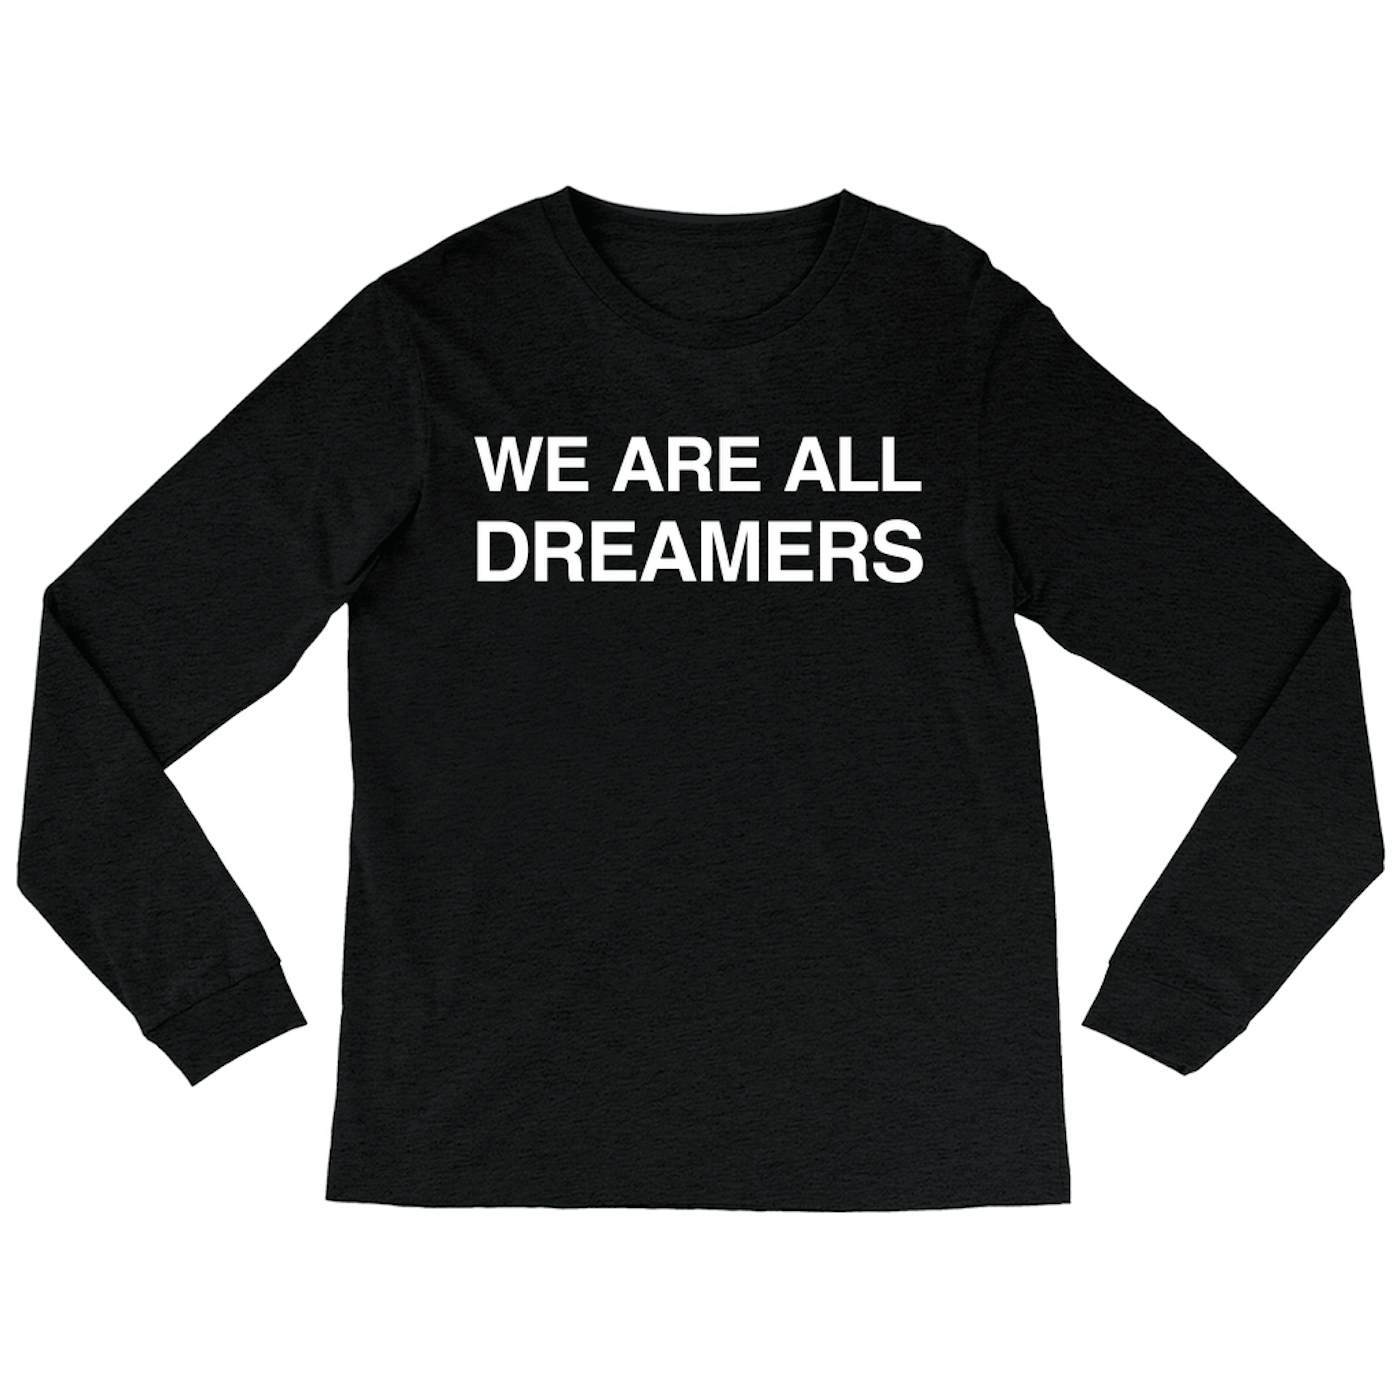 Britney Spears Long Sleeve Shirt | We Are All Dreamers Worn By Britney Spears Britney Spears Shirt